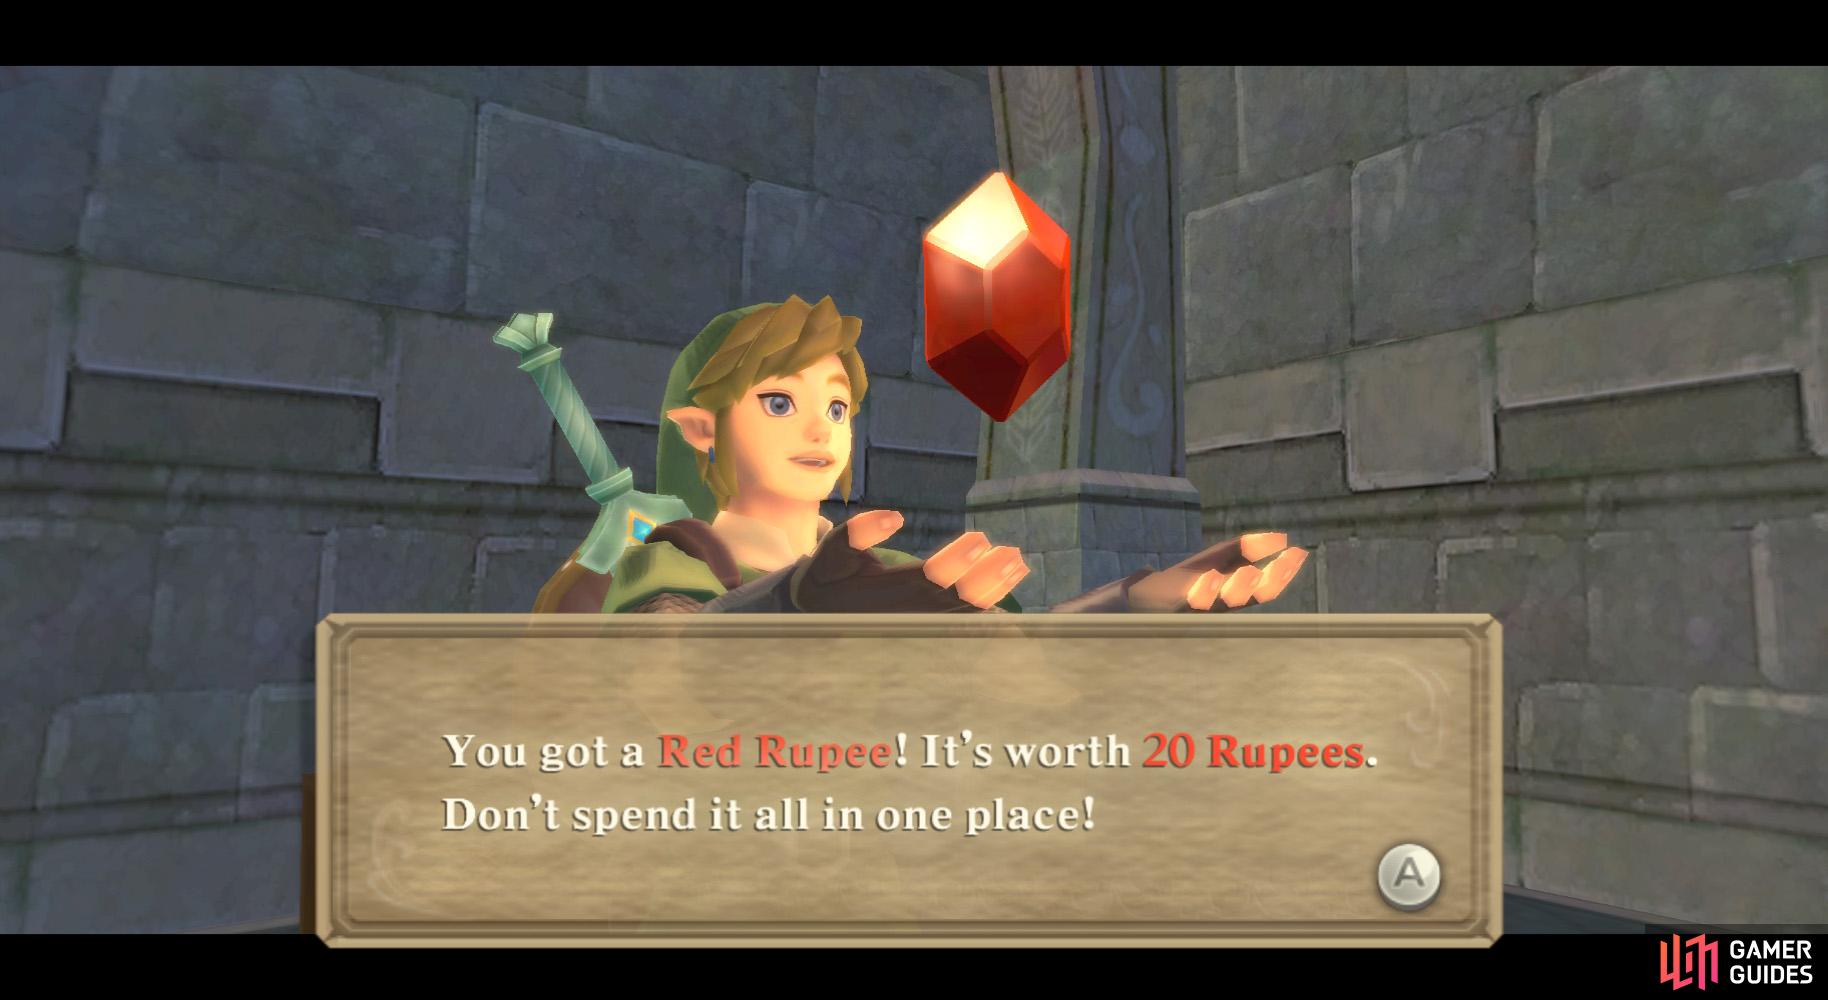 Then pick up a Red Rupee to feel good about yourself.